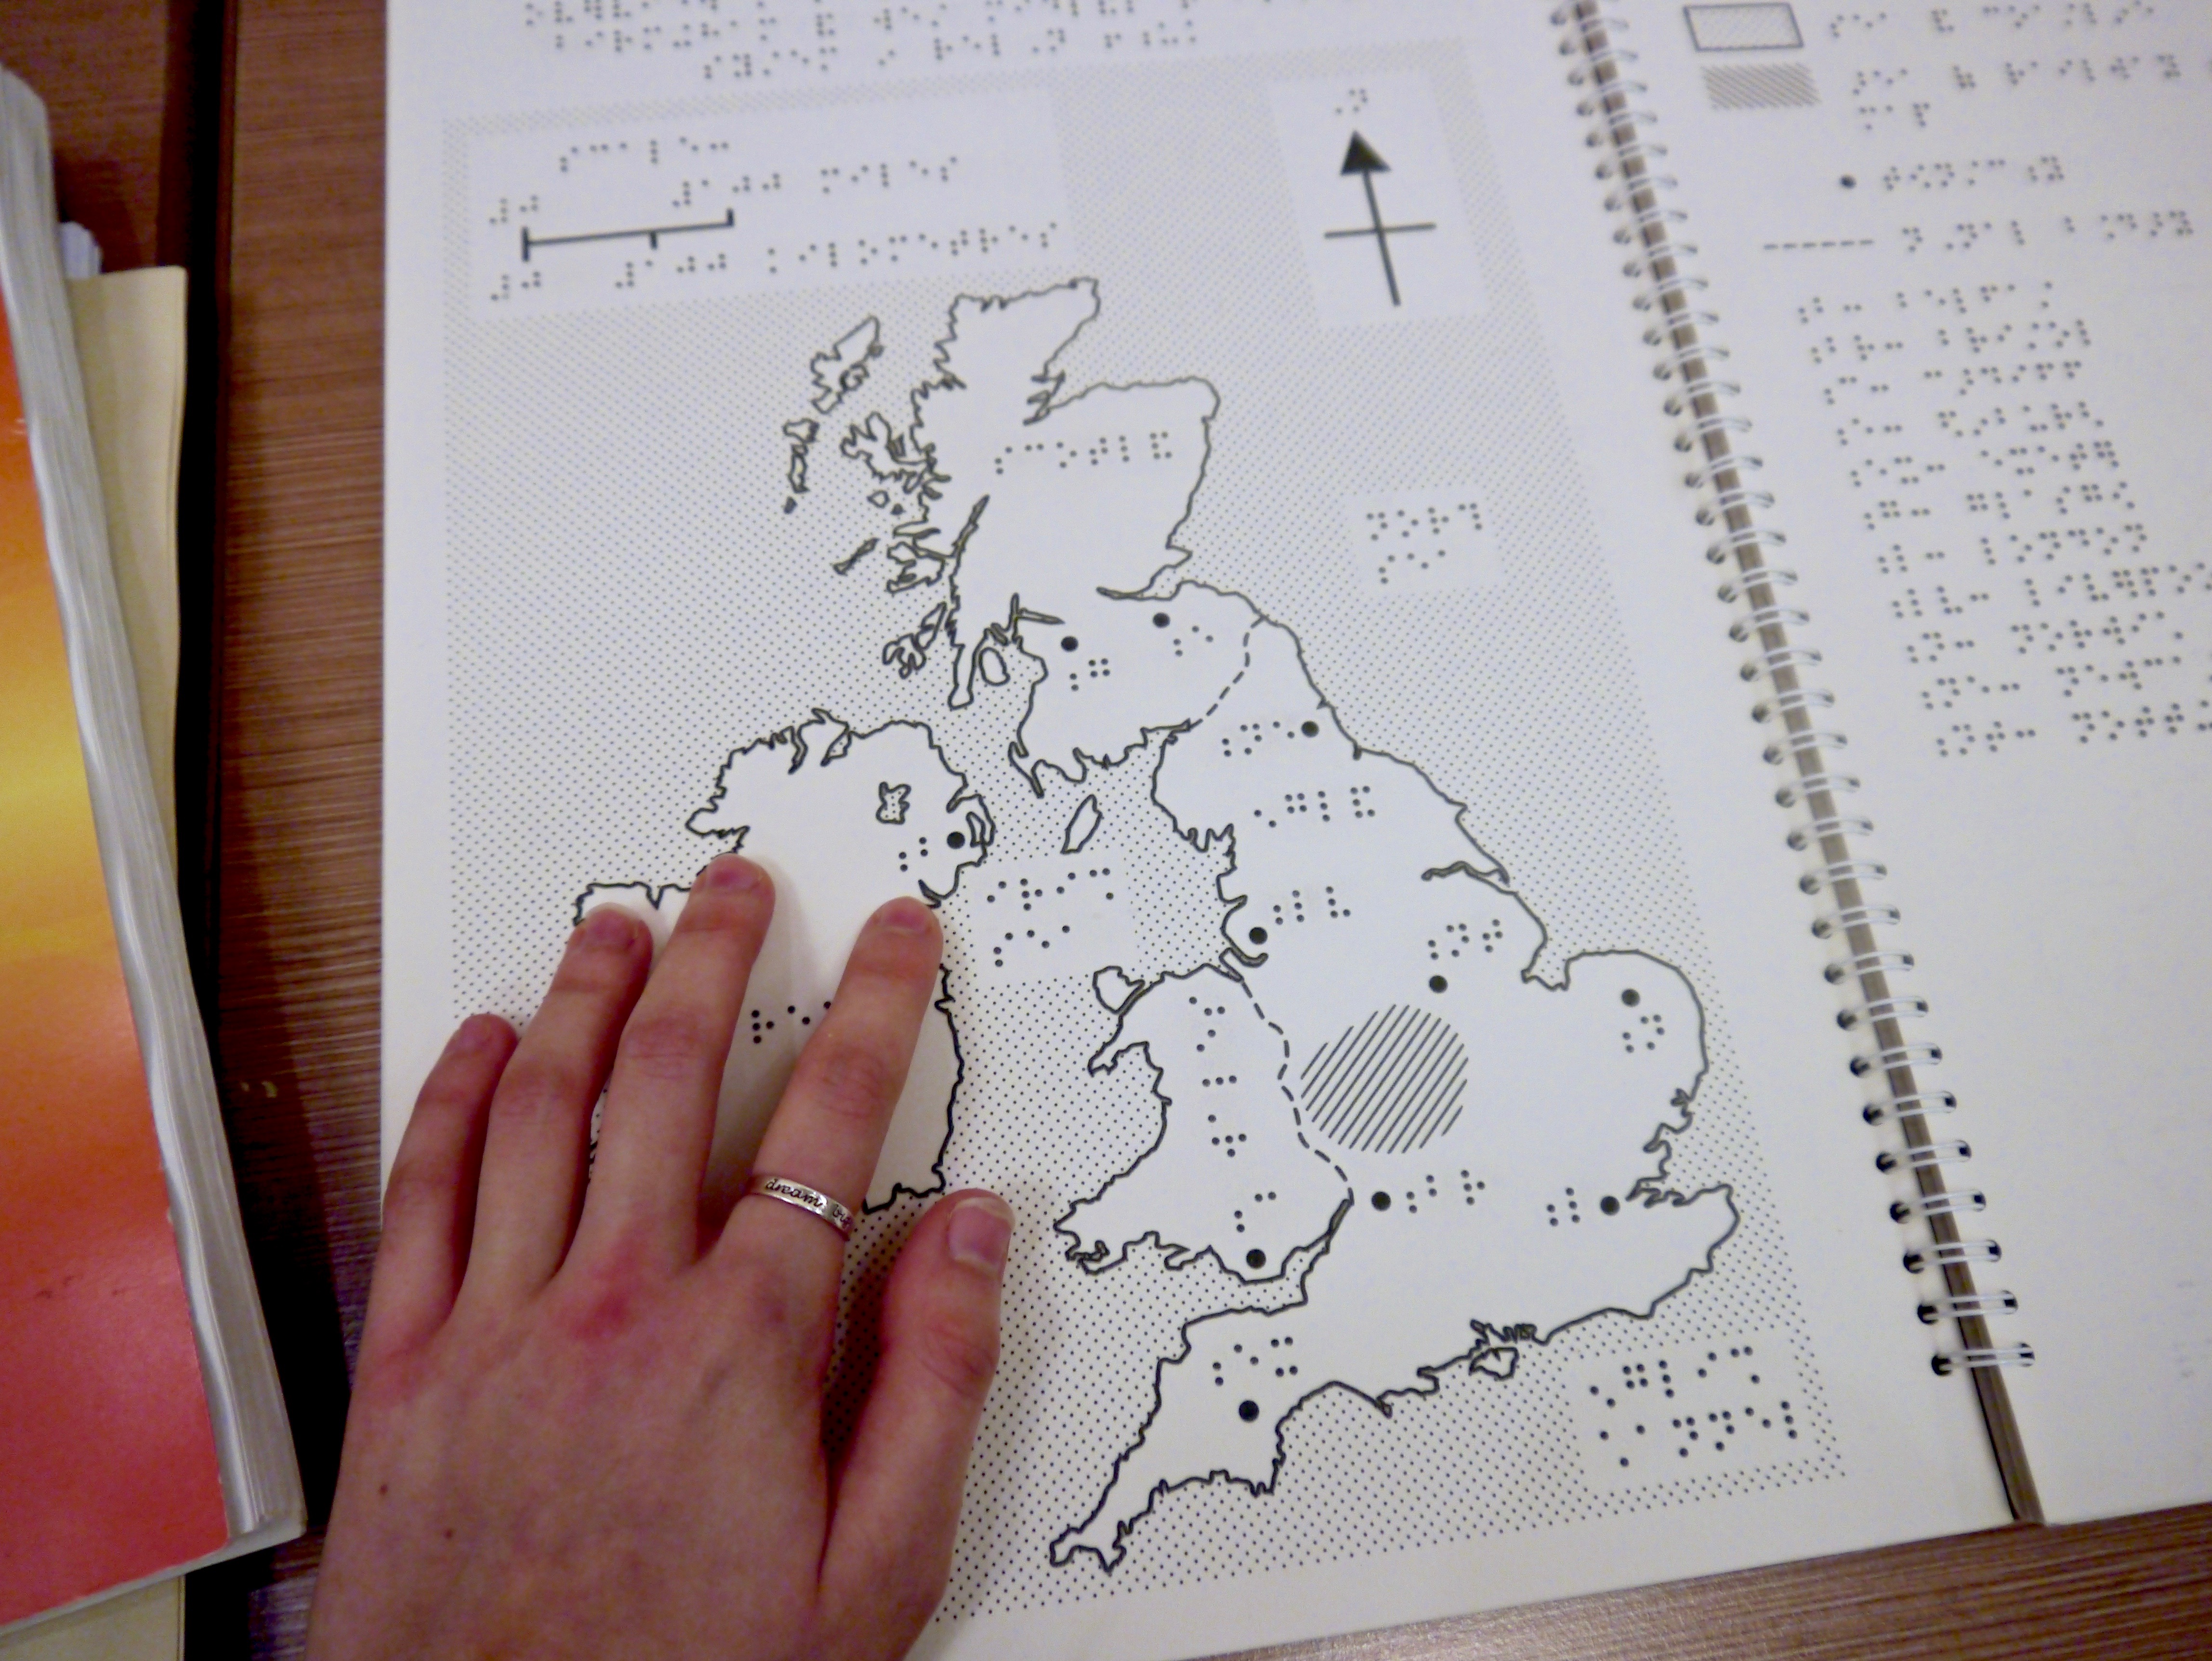 A photograph of a Braille map of the UK, being touched by a hand